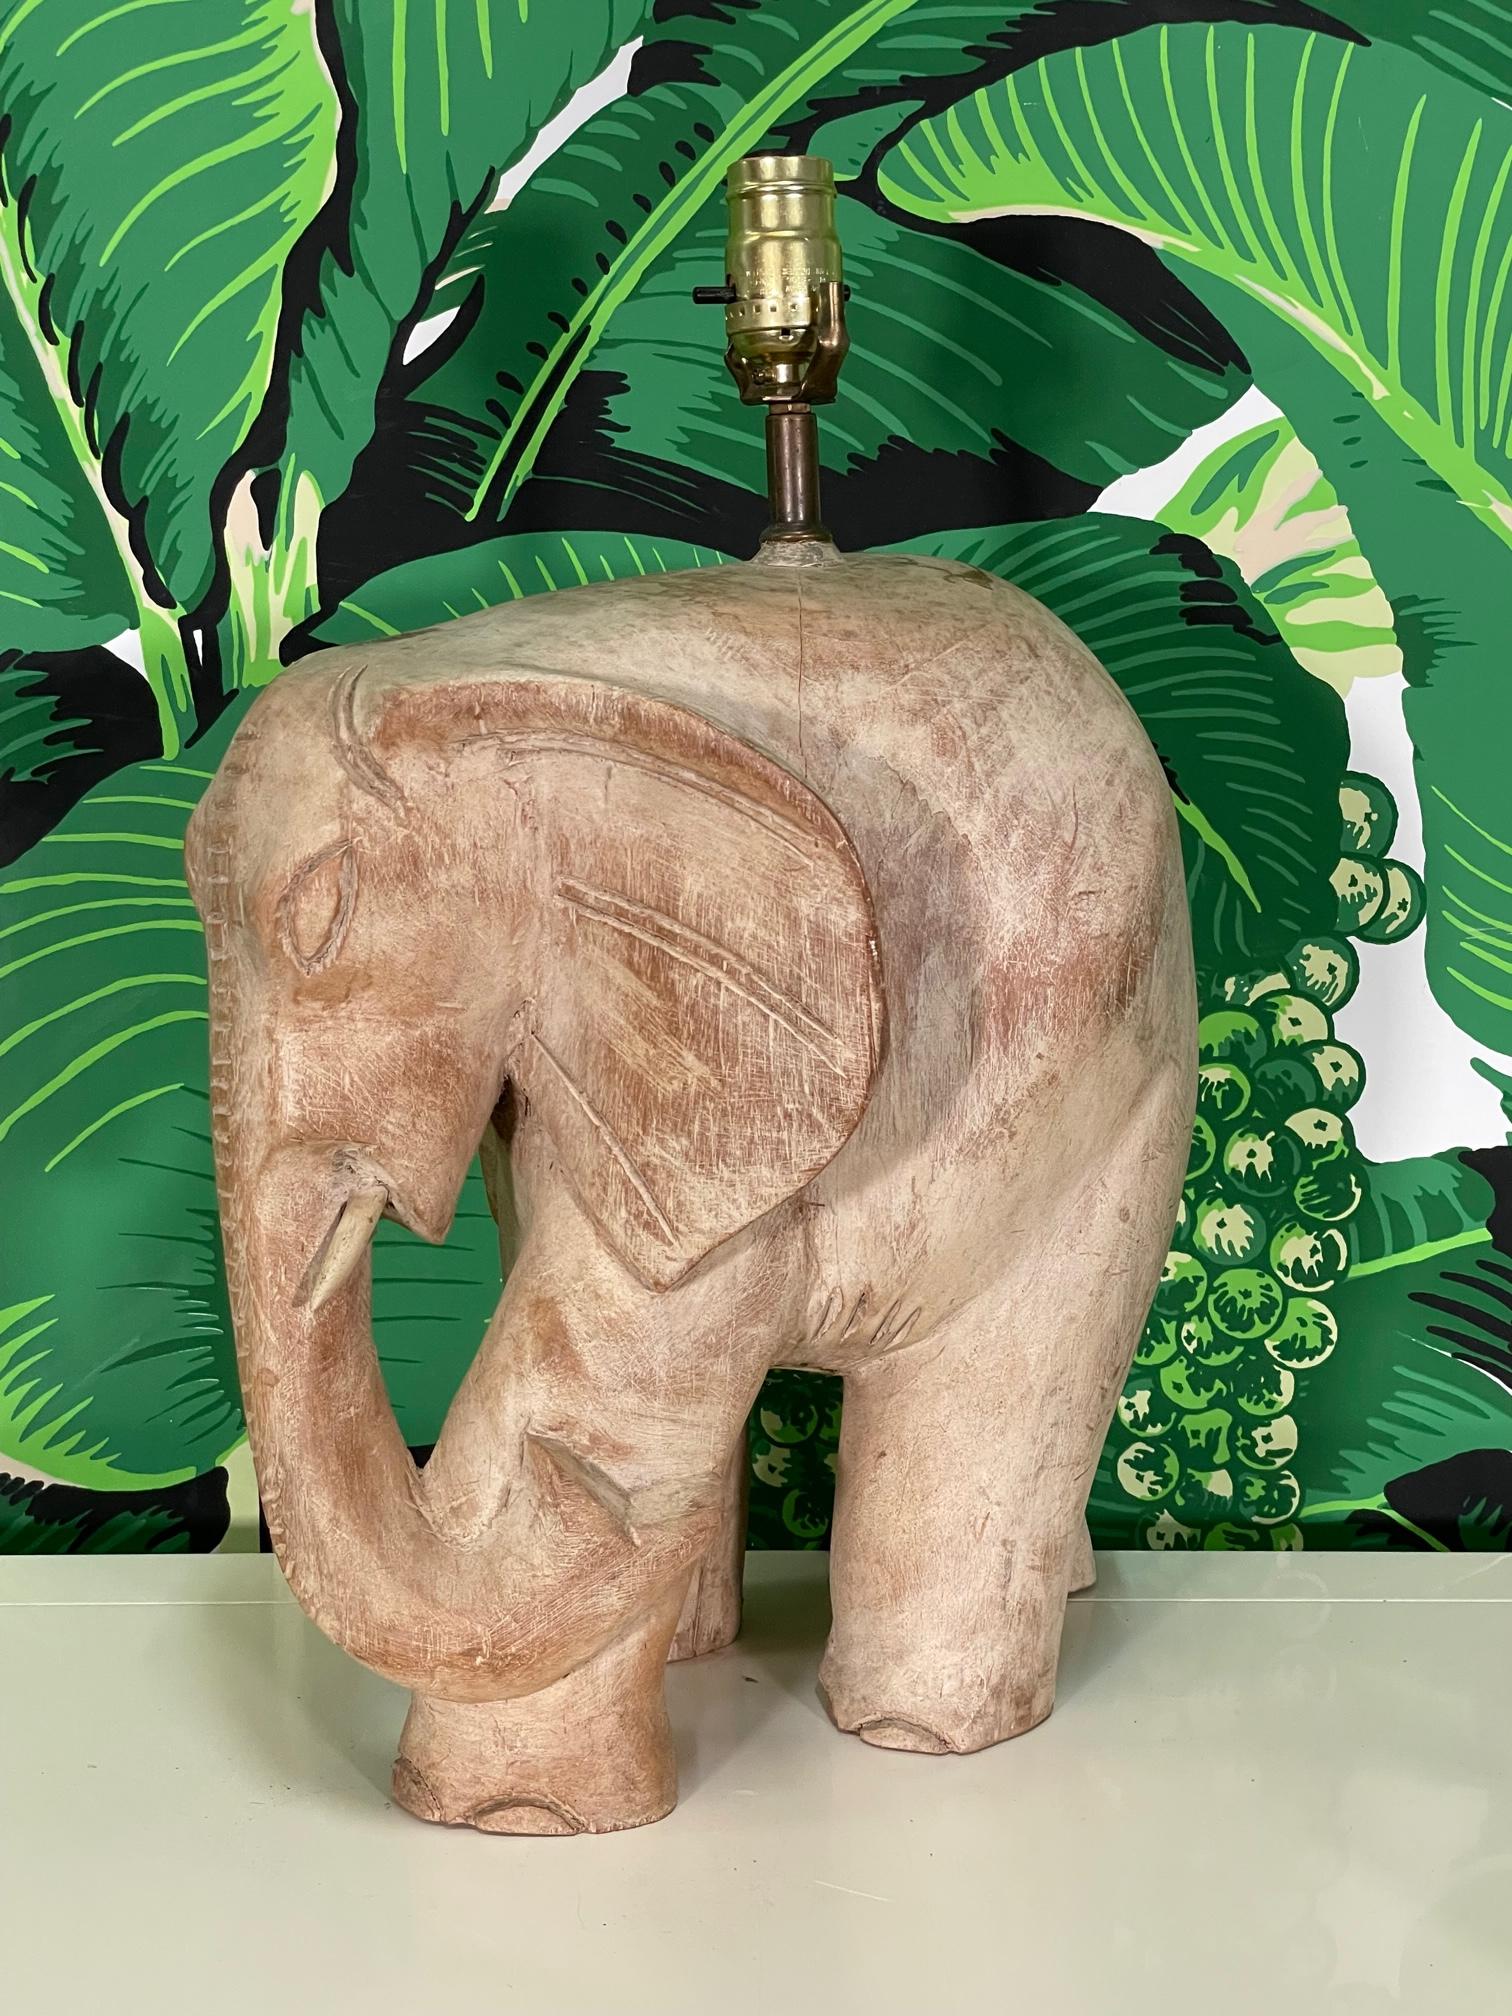 Large hand carved wood African elephant table lamp. Good condition with minor imperfections consistent with age, some cracks but no structural compromise. 
For a shipping quote to your exact zip code, please message us.

